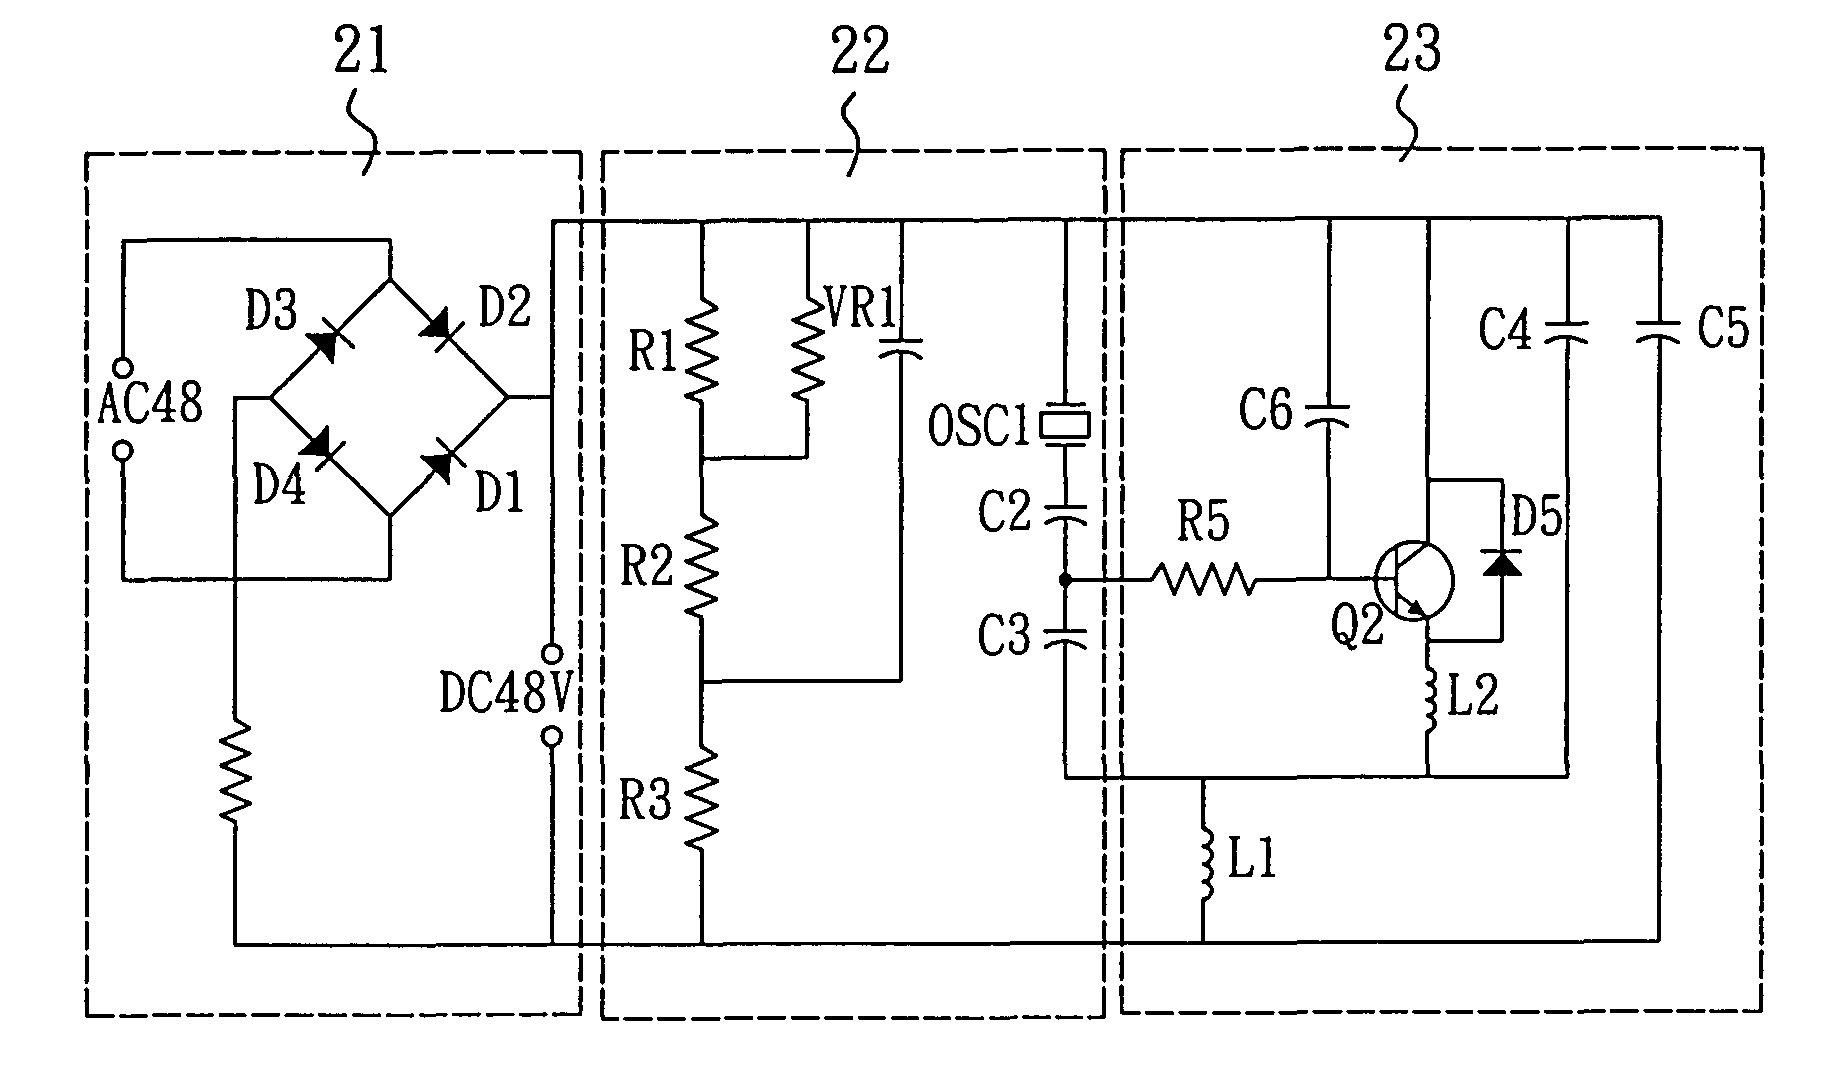 Ultrasonic nebulizer for producing high-volume sub-micron droplets